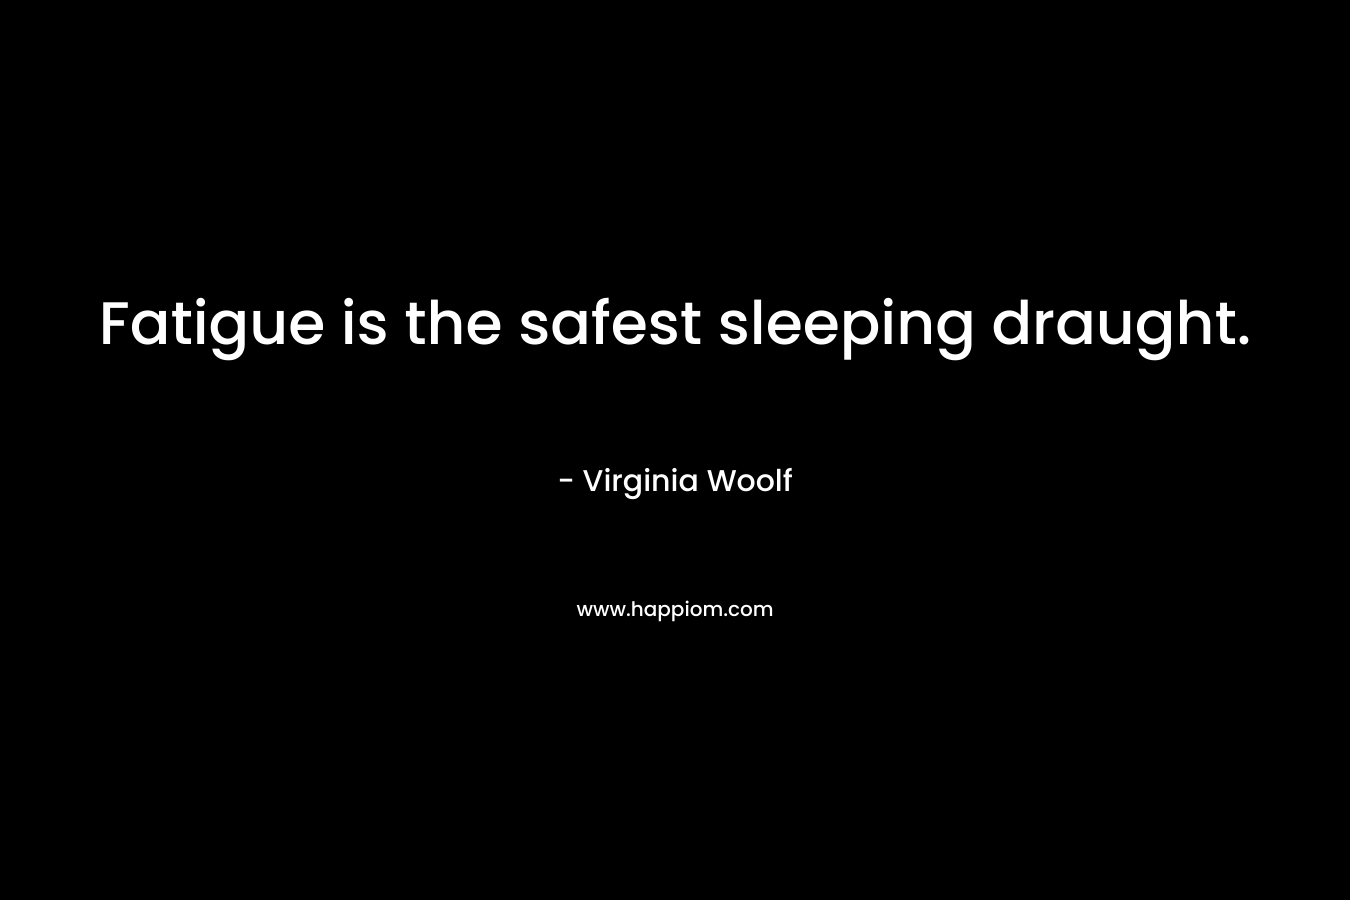 Fatigue is the safest sleeping draught. – Virginia Woolf